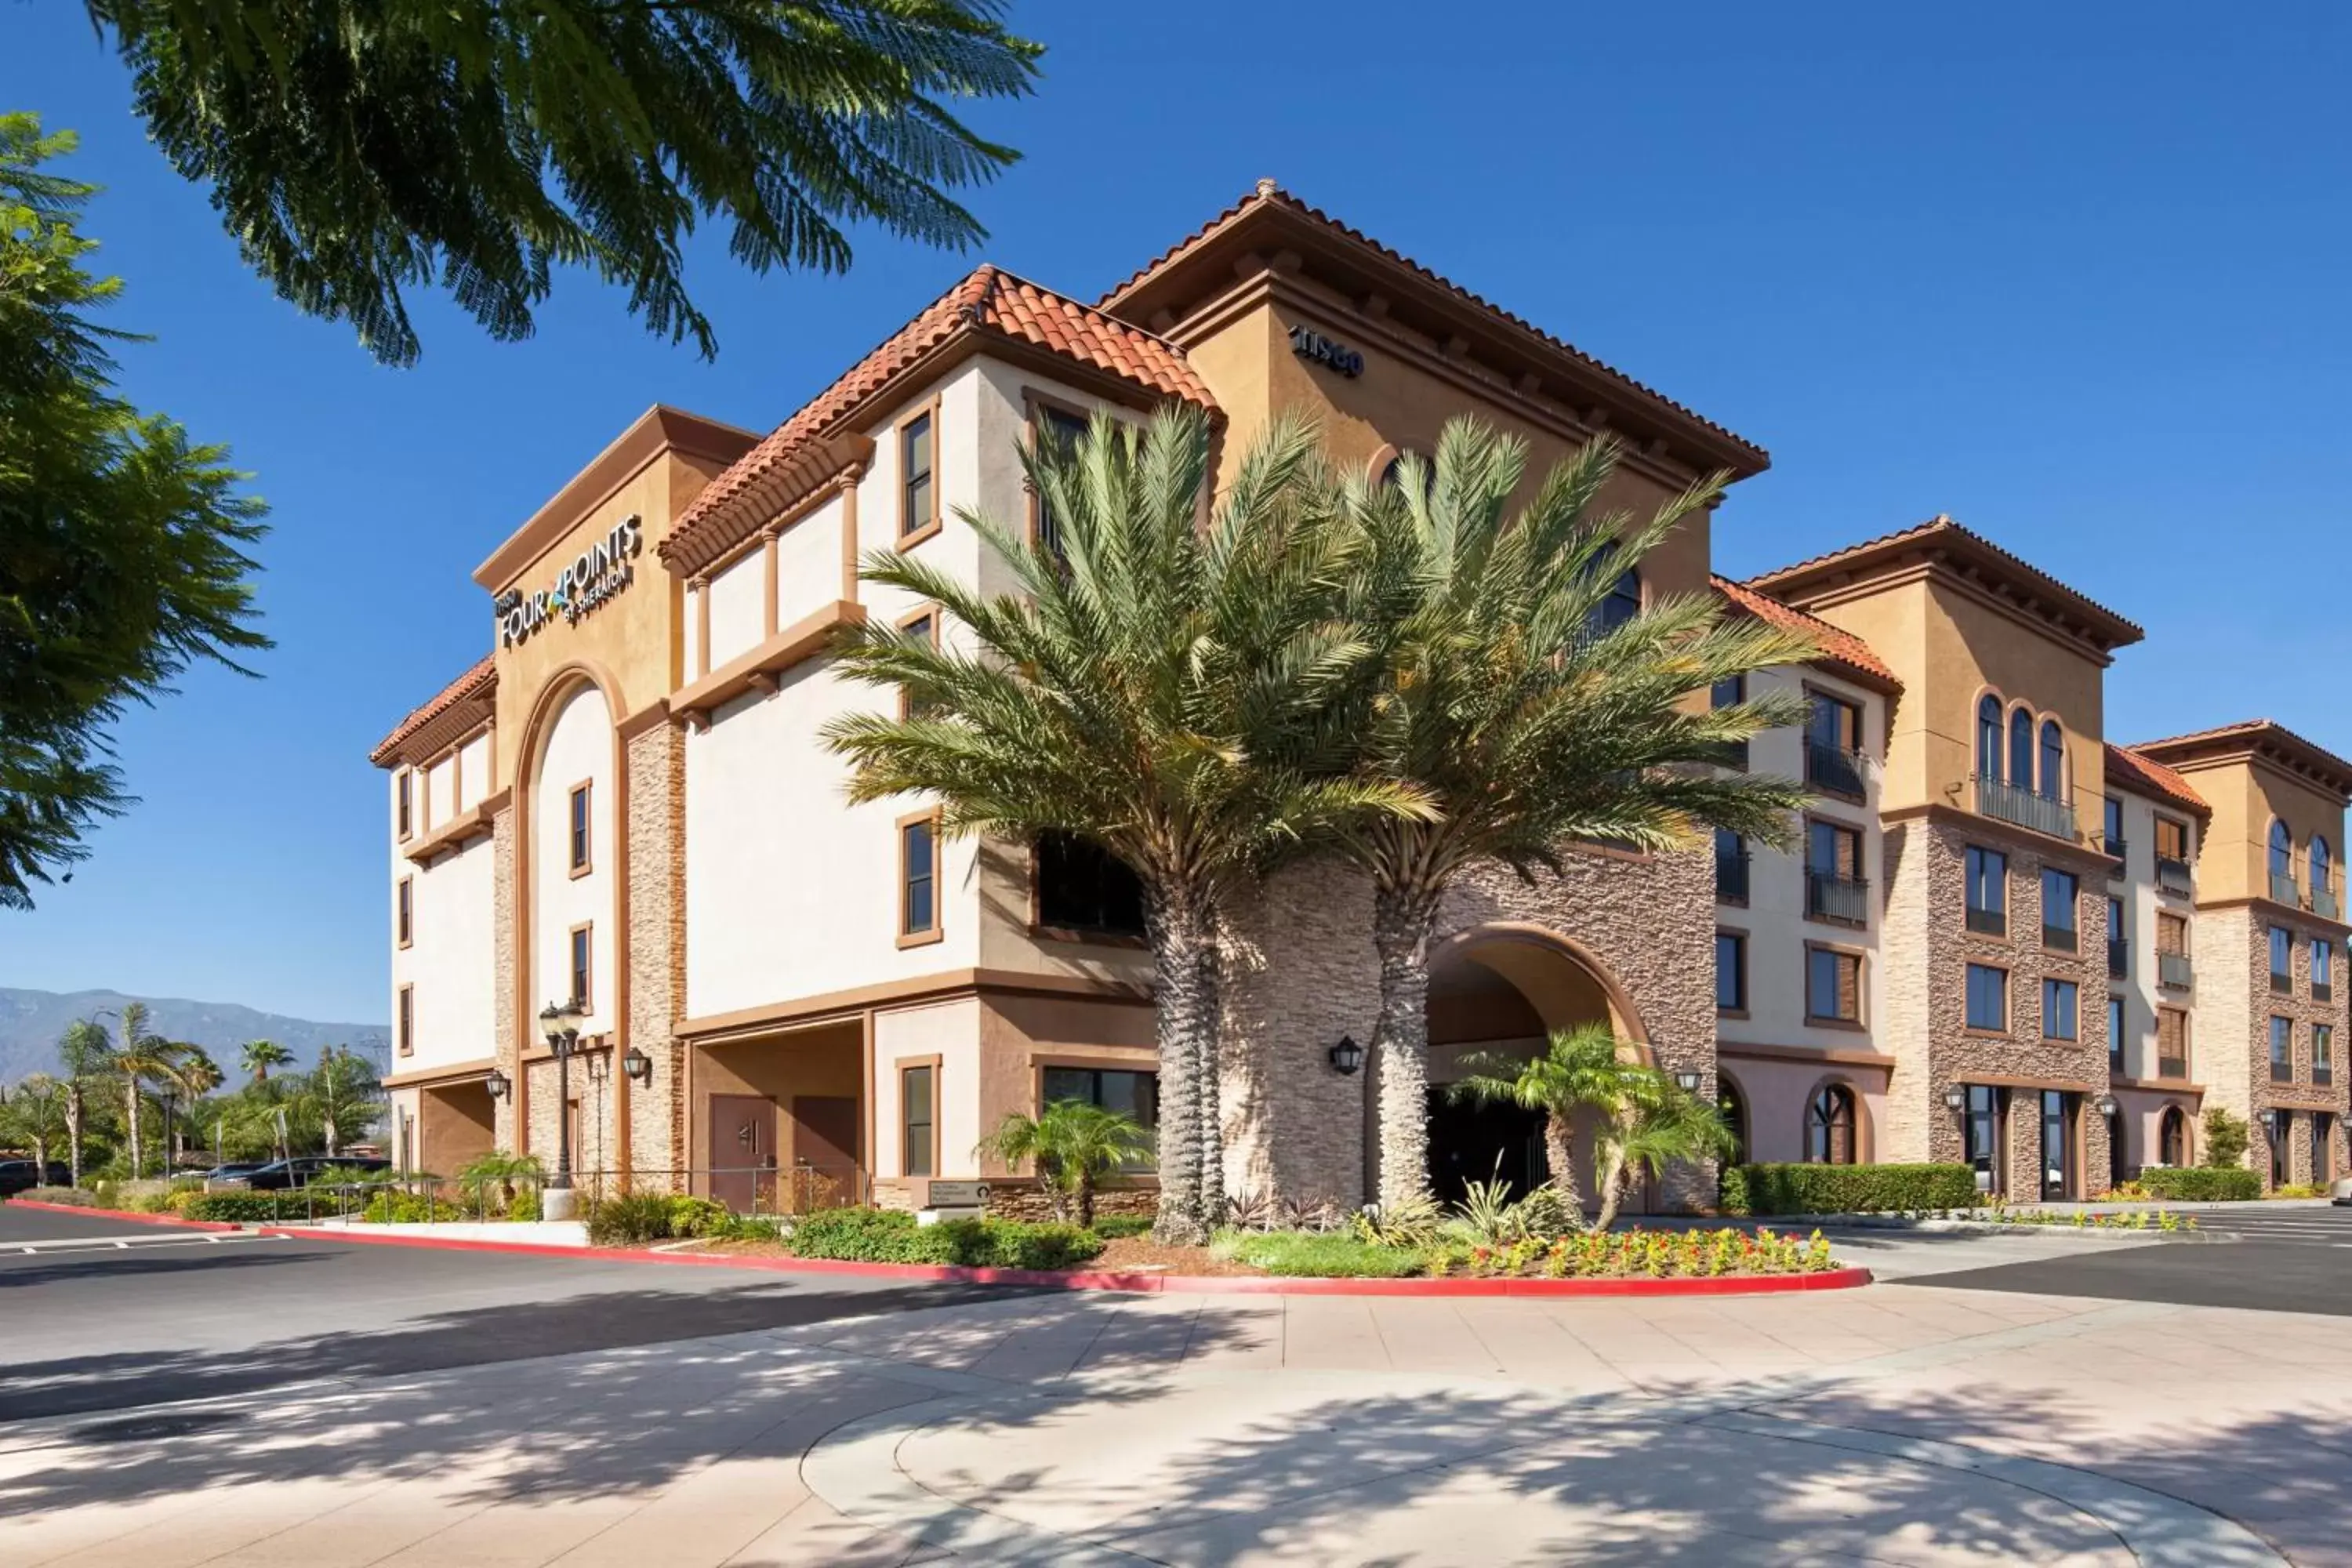 Property Building in Four Points by Sheraton, Ontario-Rancho Cucamonga